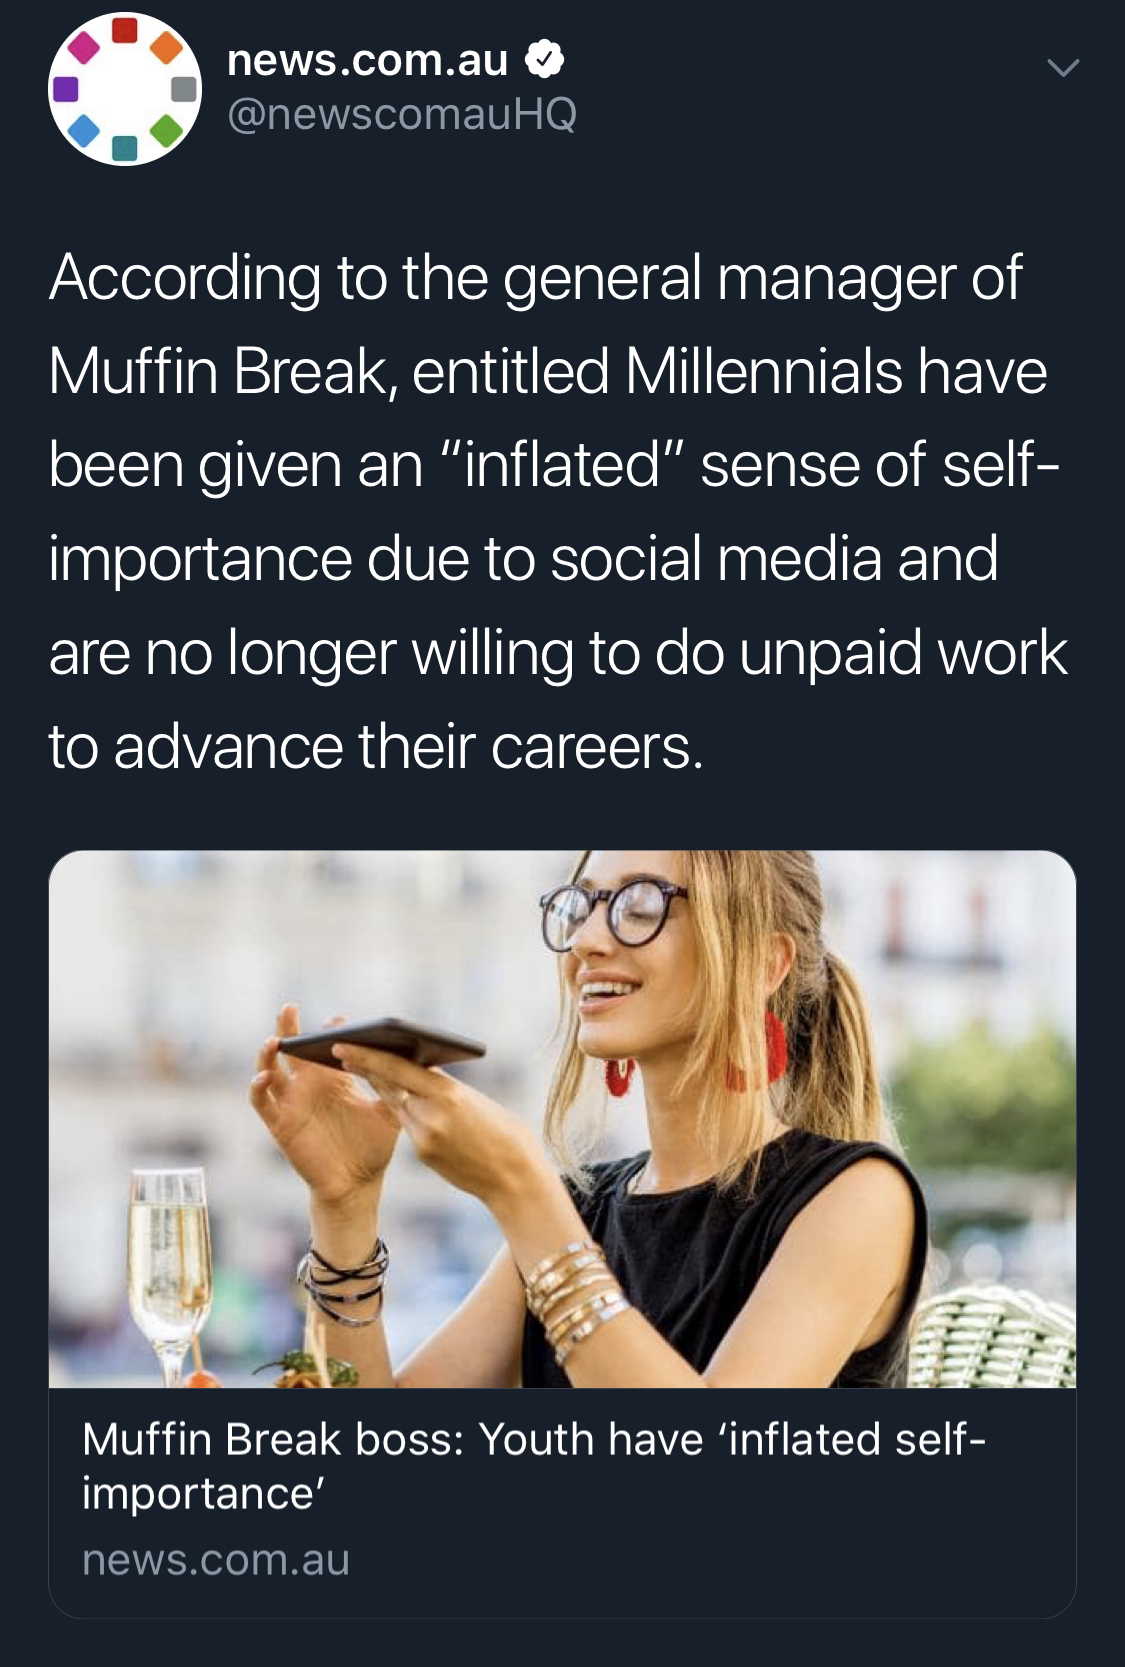 Entitled+millennials+want+to+get+paid+for+their+work